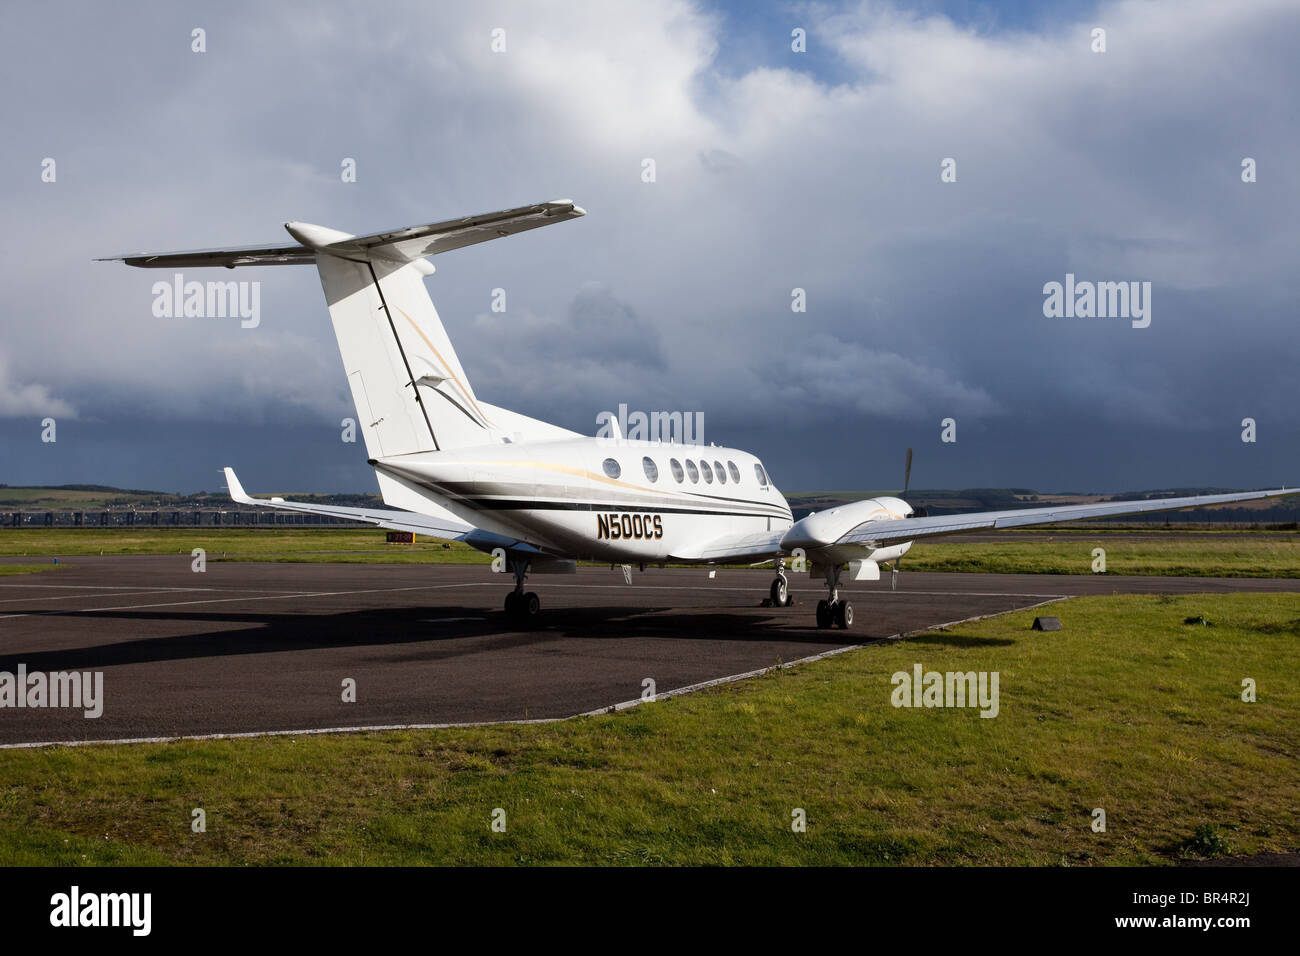 N500CS - Twin turbo prop aircraft on Apron at Dundee Airport,Tayside,  Scotland, UK Stock Photo